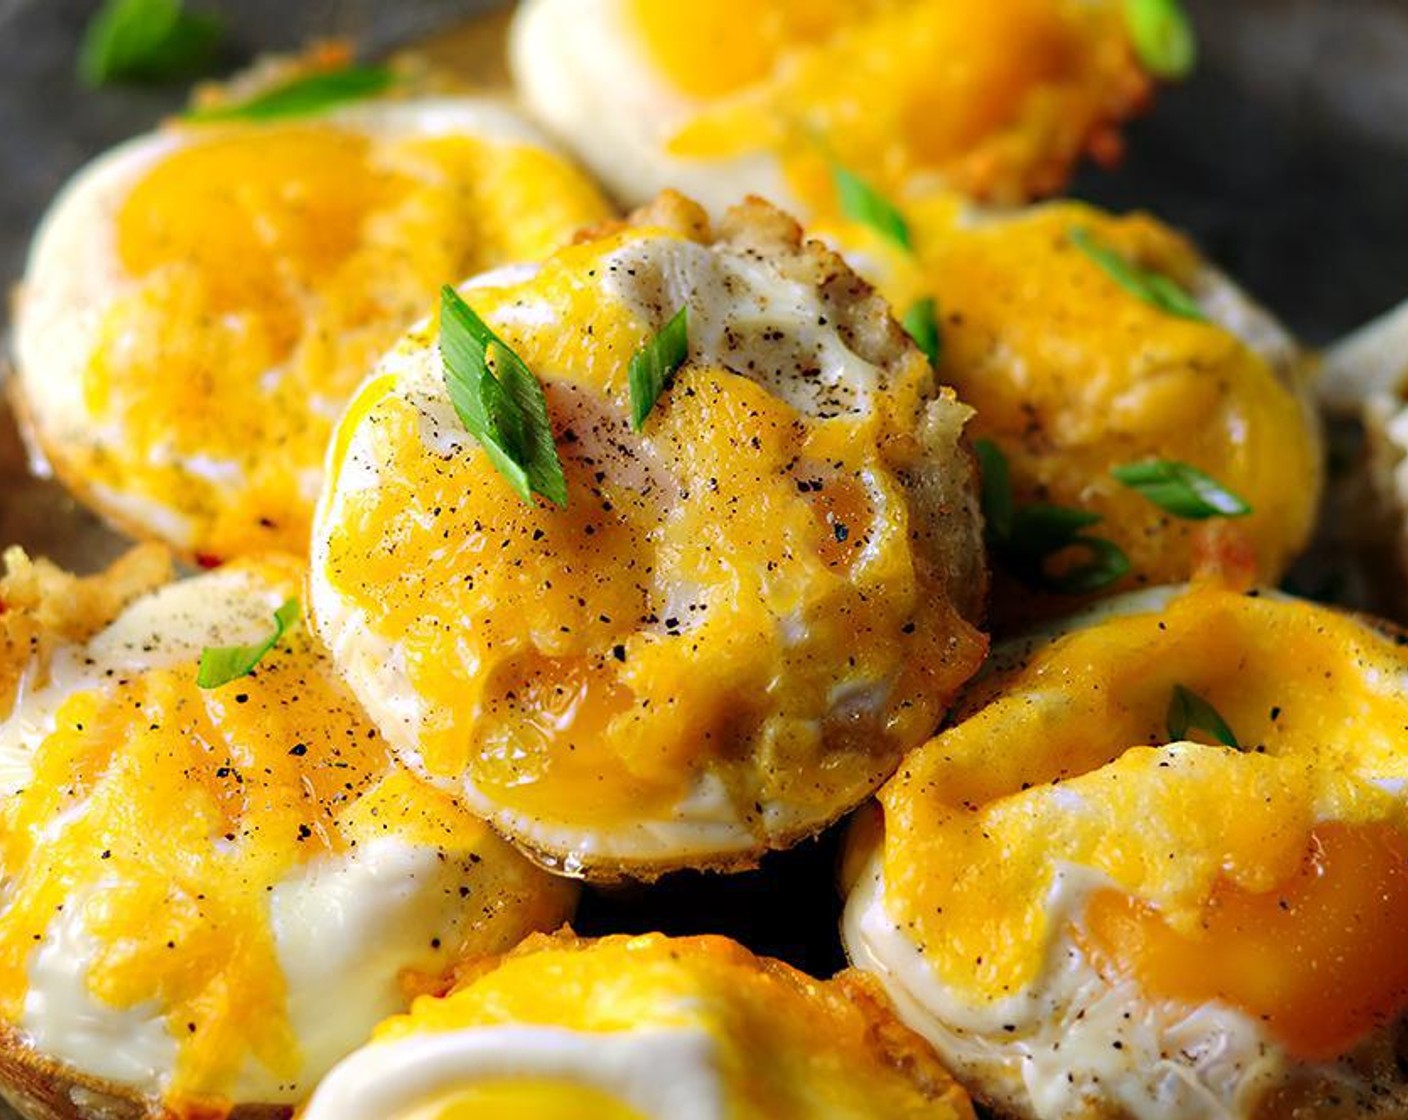 Tater Tot Cups with Egg & Cheese